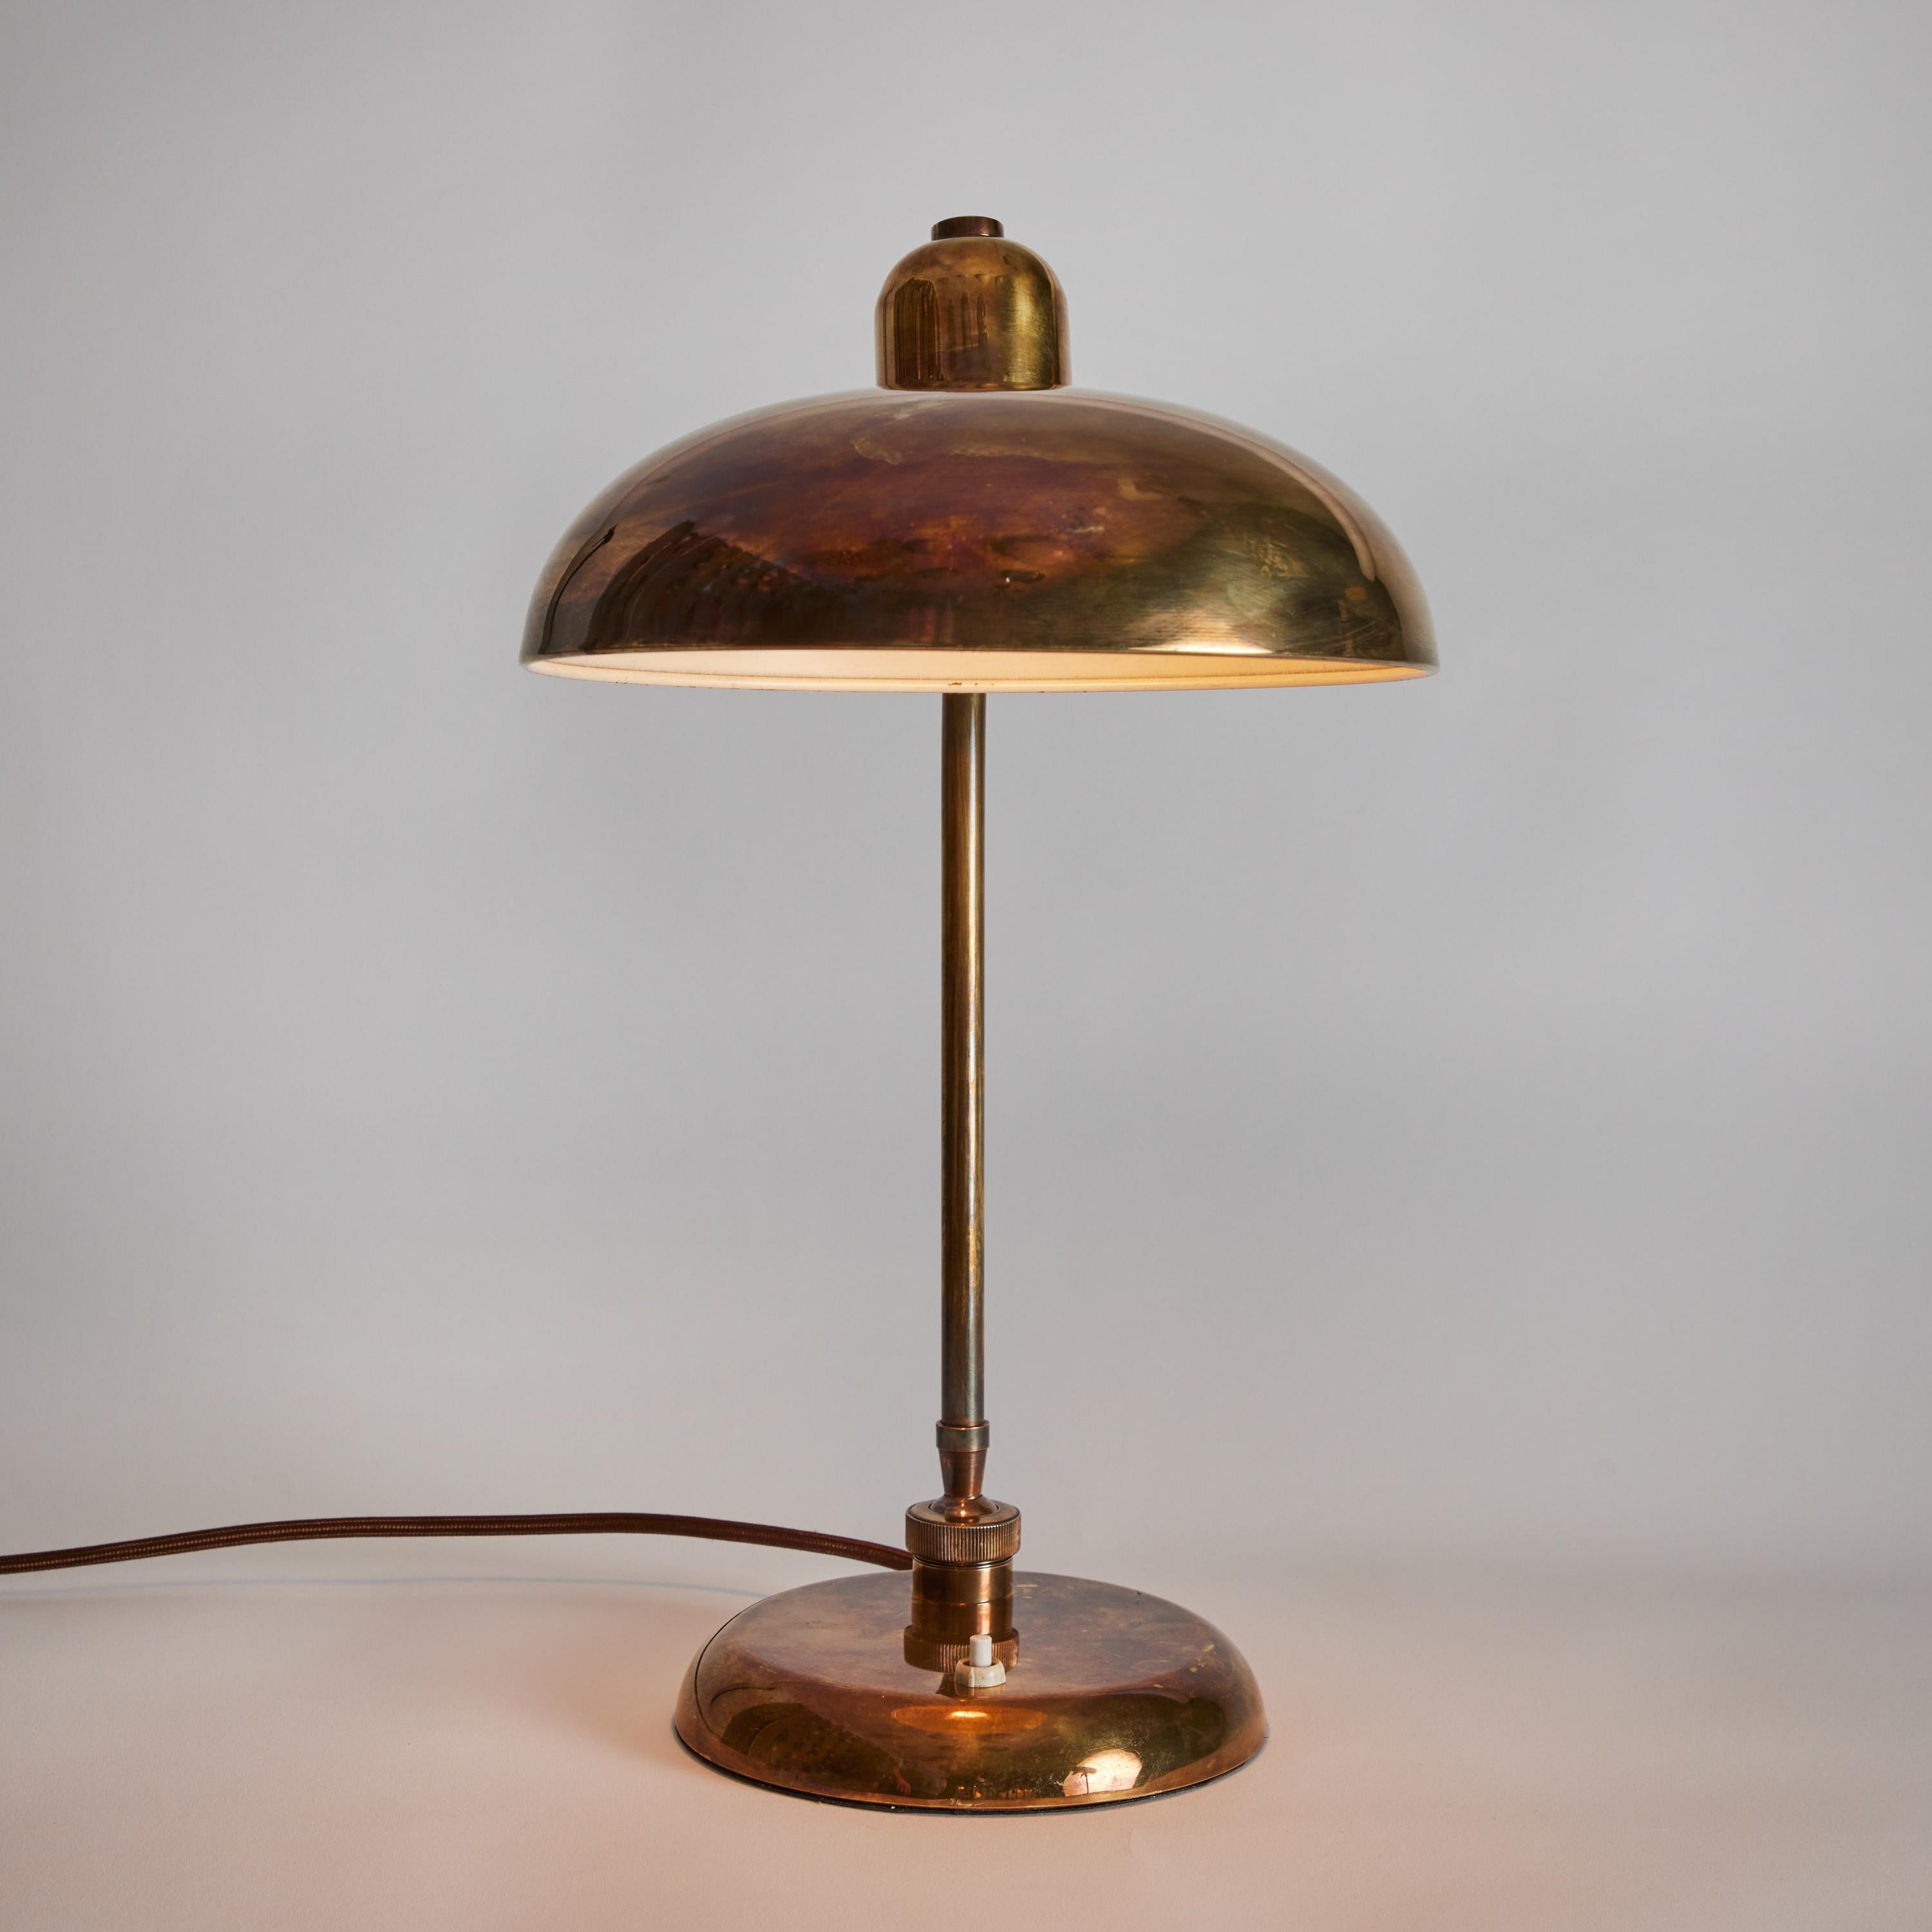 1940s Giovanni Michelucci patinated brass ministerial table lamp for Lariolux. Produced circa 1940 and executed in richly patinated brass with swiveling arm and rotating adjustable shade. Reminiscent of the early designs of Kaiser Idell. An elegant